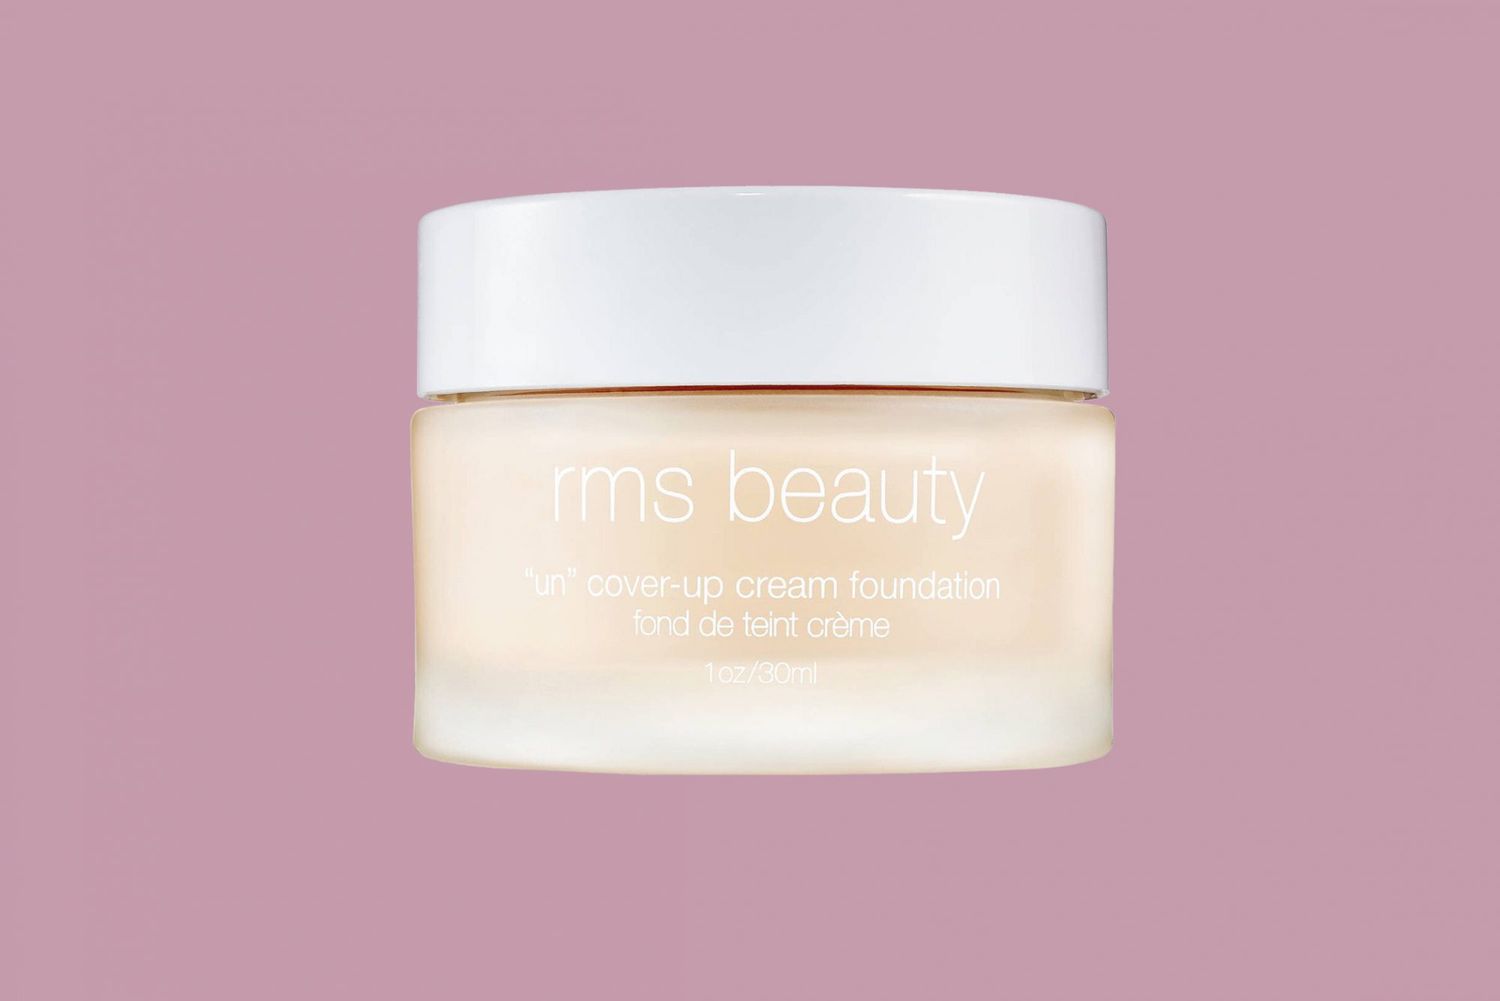 RMS Beauty "Un" Cover-Up Cream Foundation